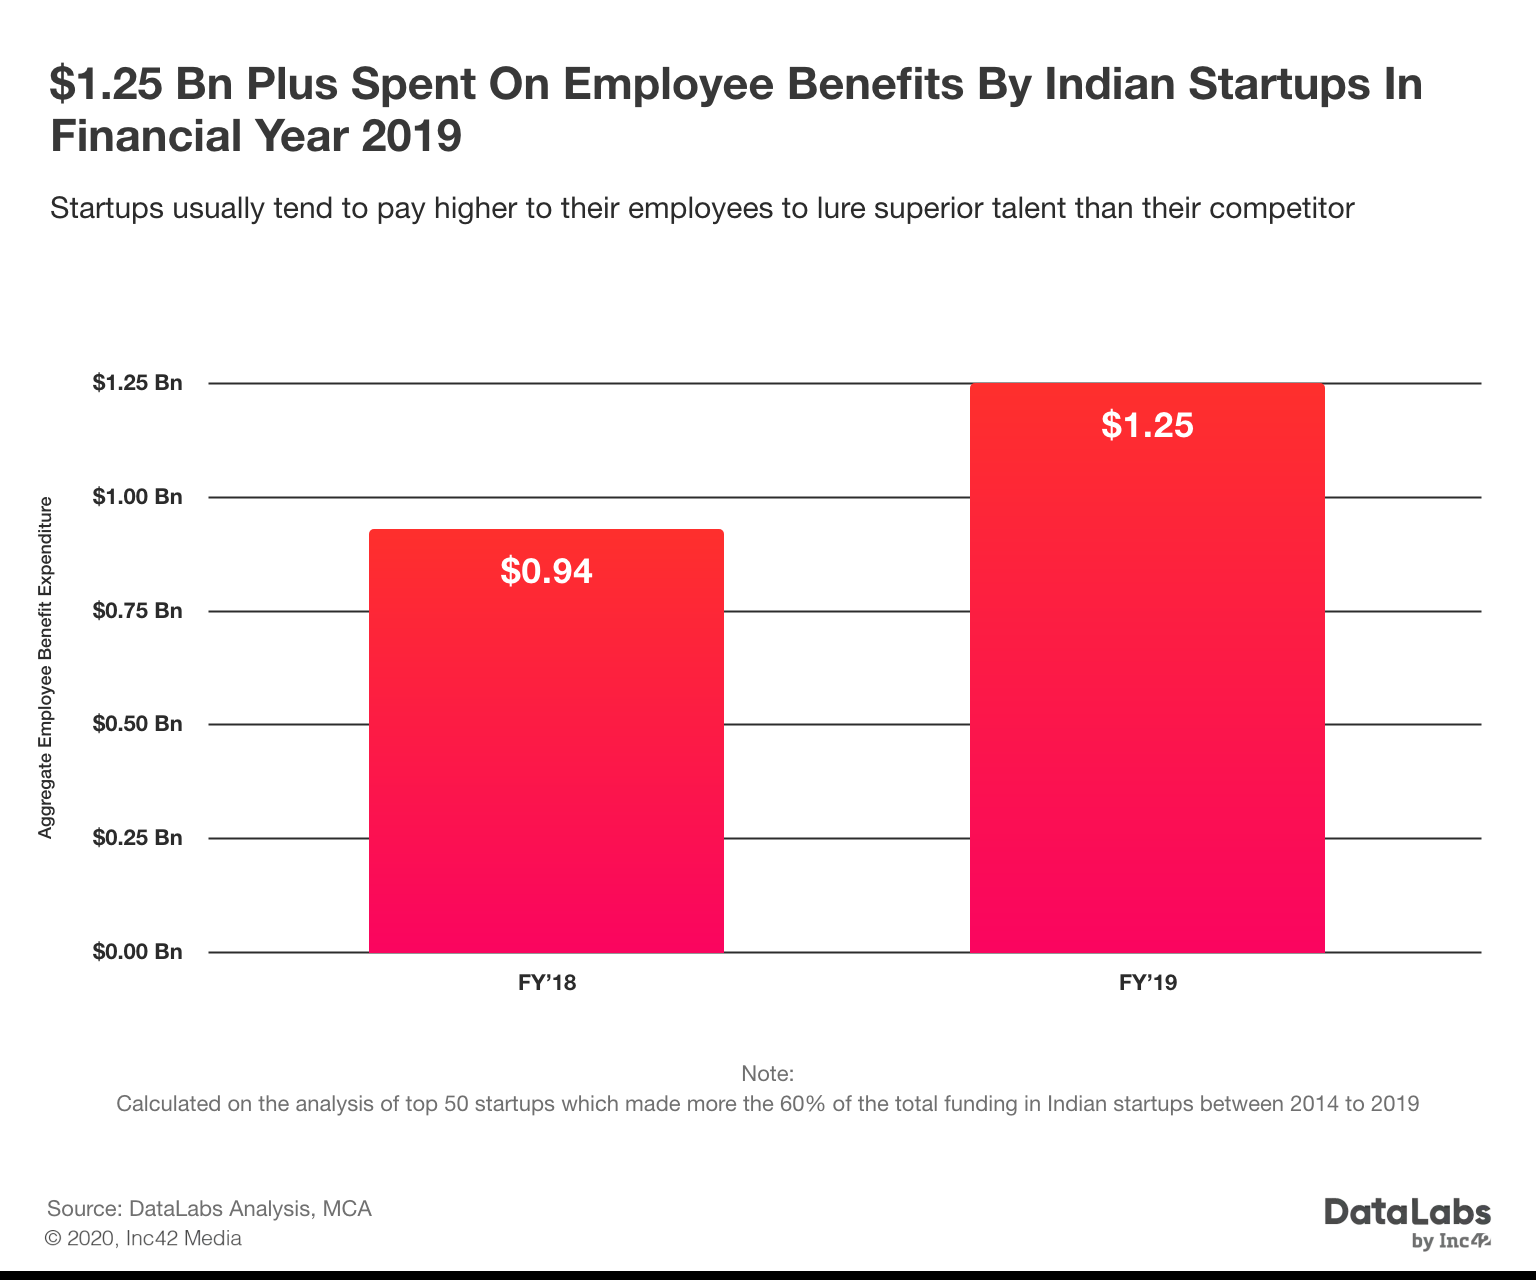 Indian startup expenditure on employee benefits and salaries